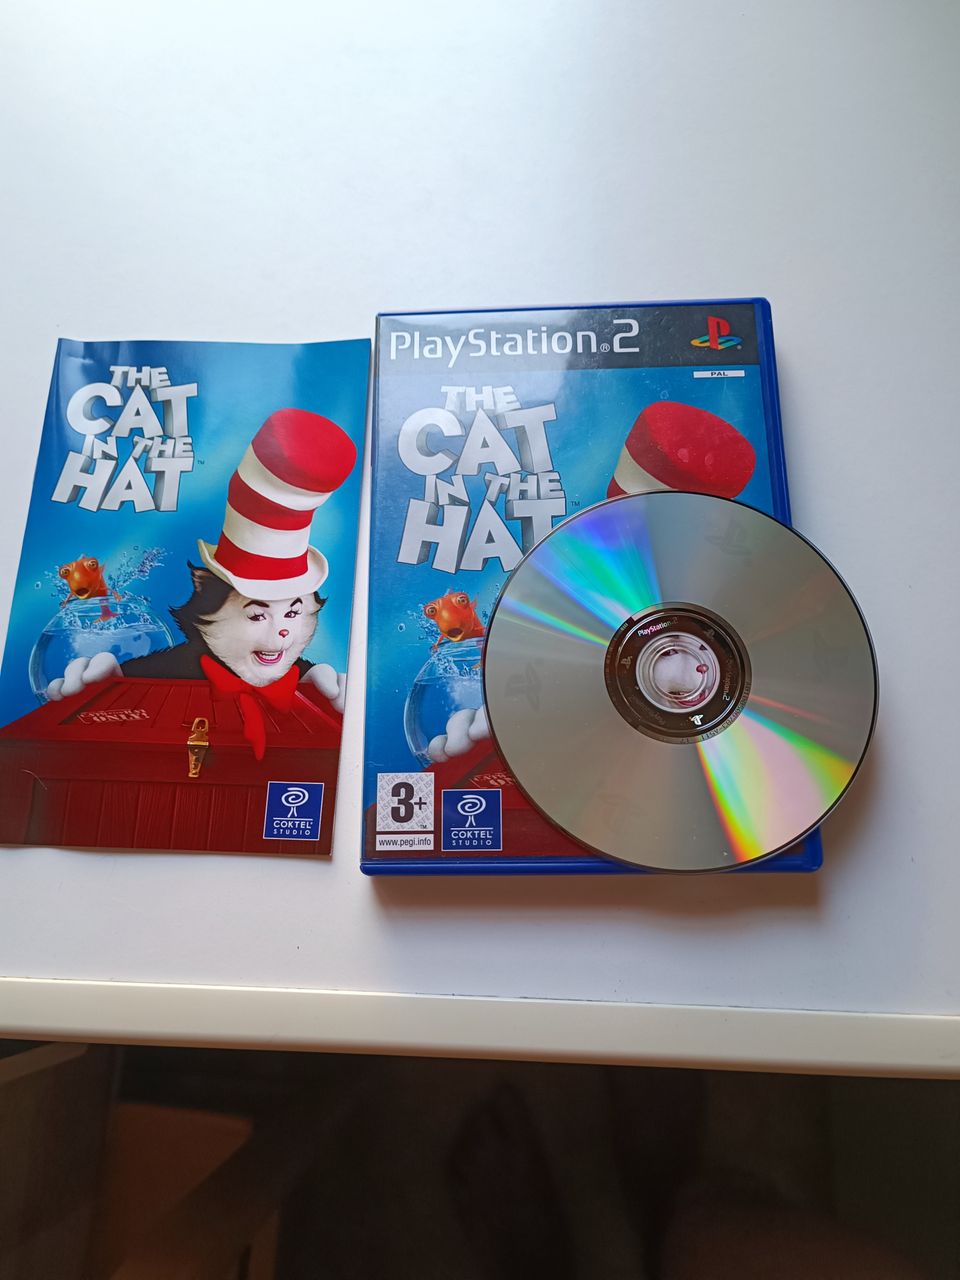 The Cat in The hat